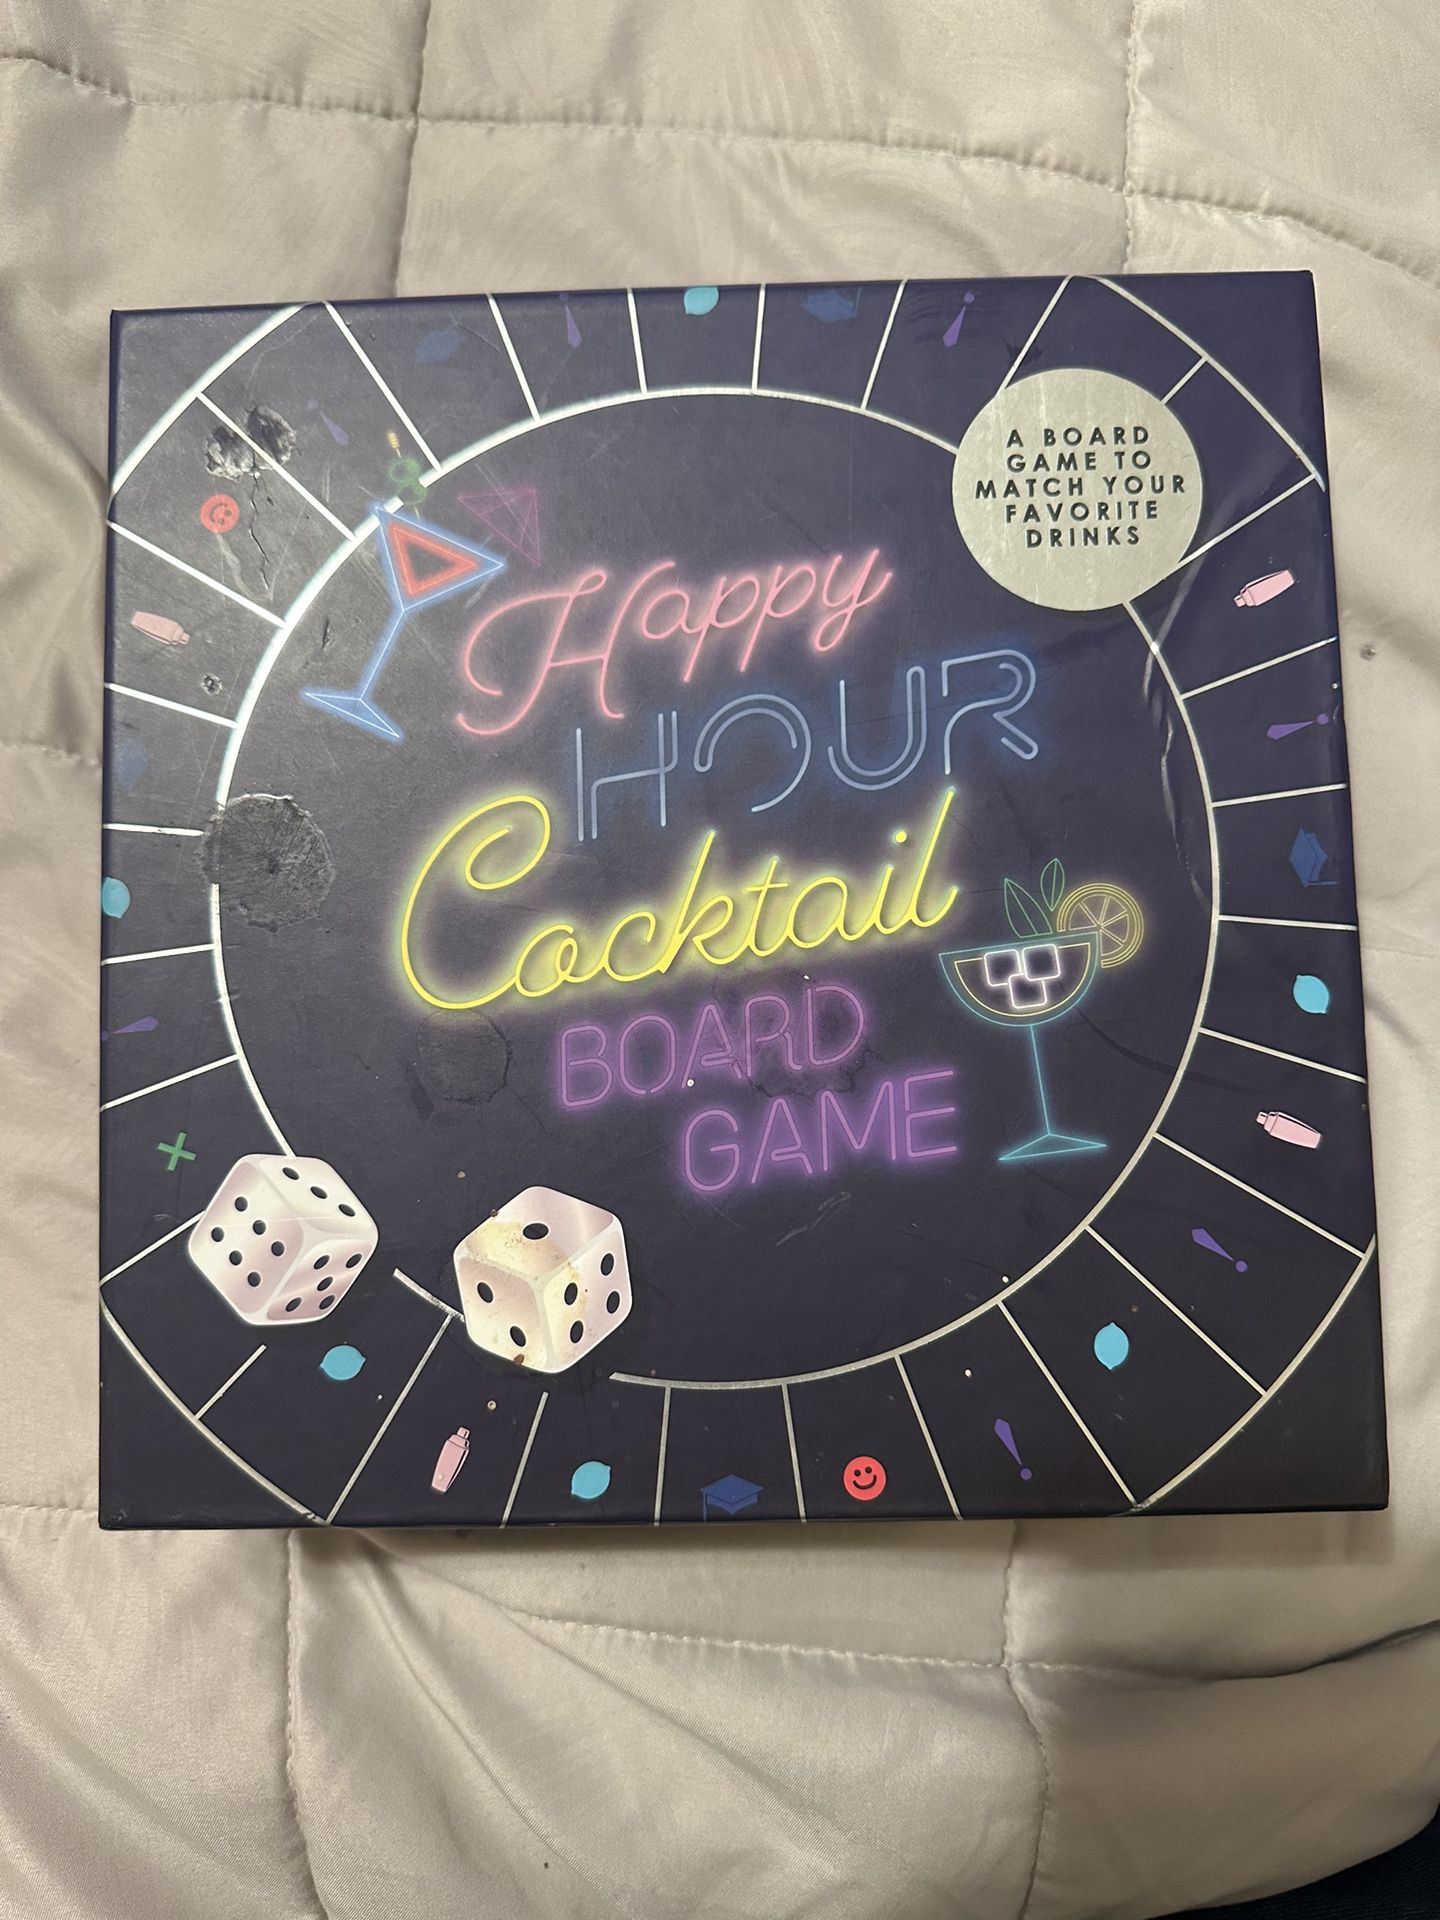 Drinking Board Game Mixologist